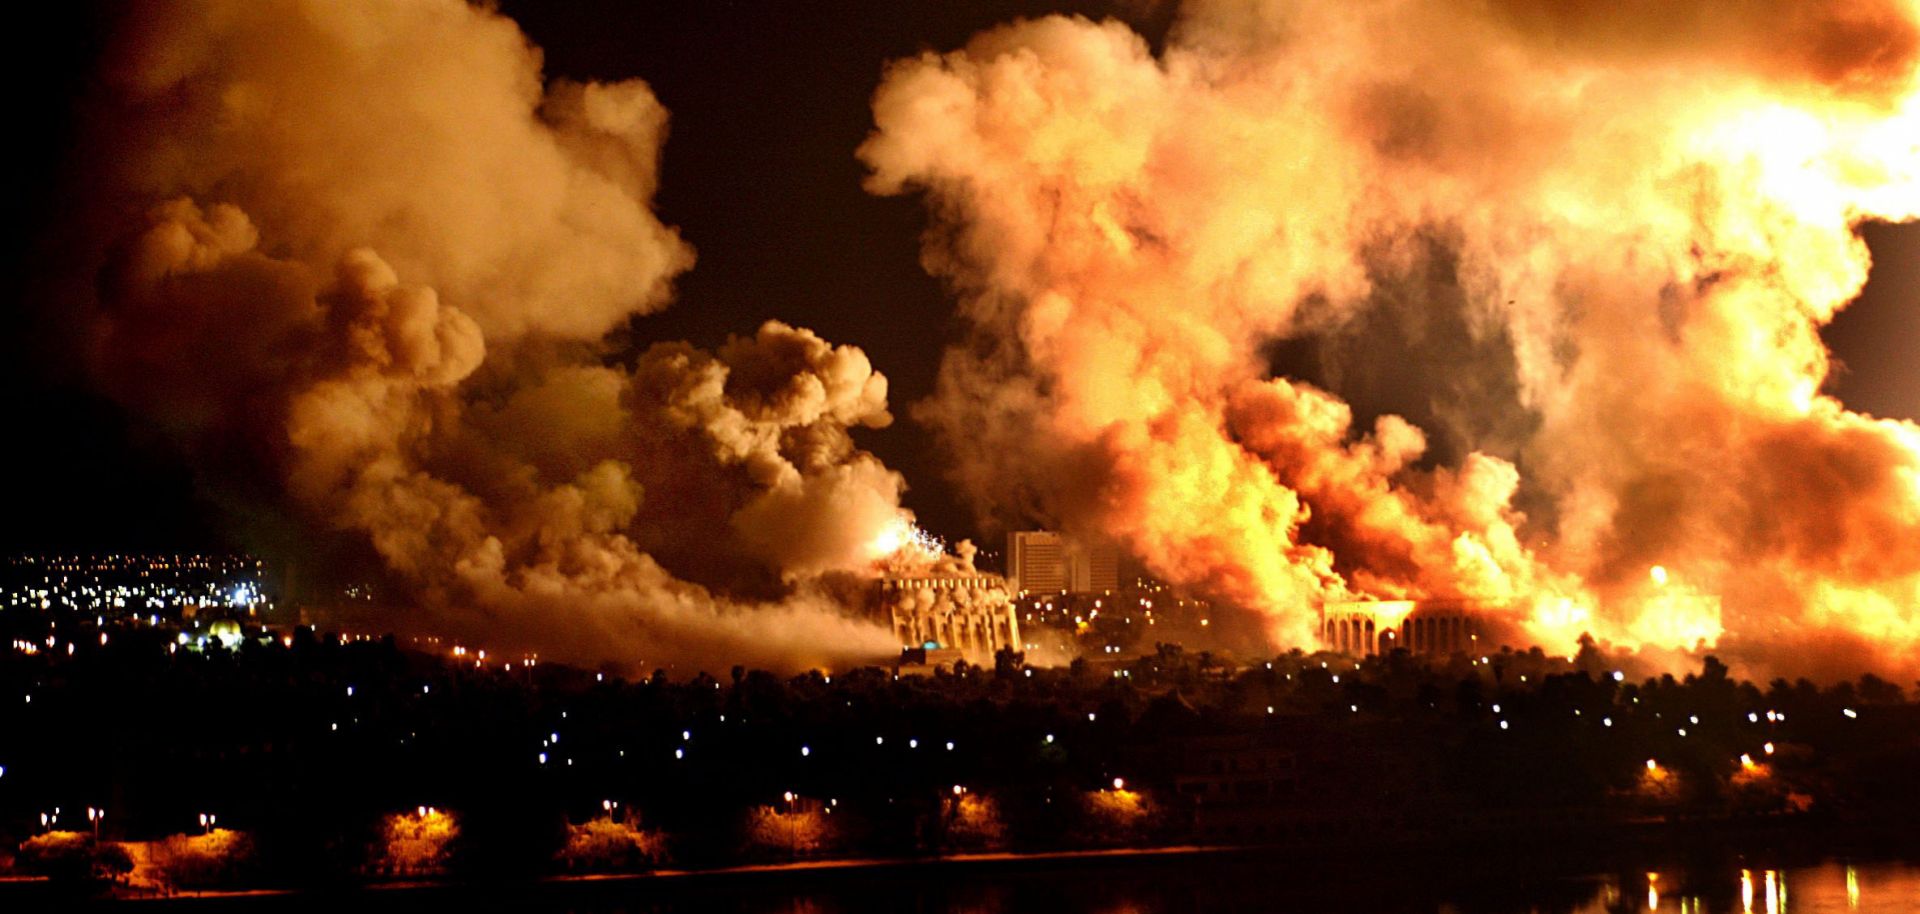 Fires burn on the west bank of the Tigris River in Baghdad, Iraq, on March 21, 2003.